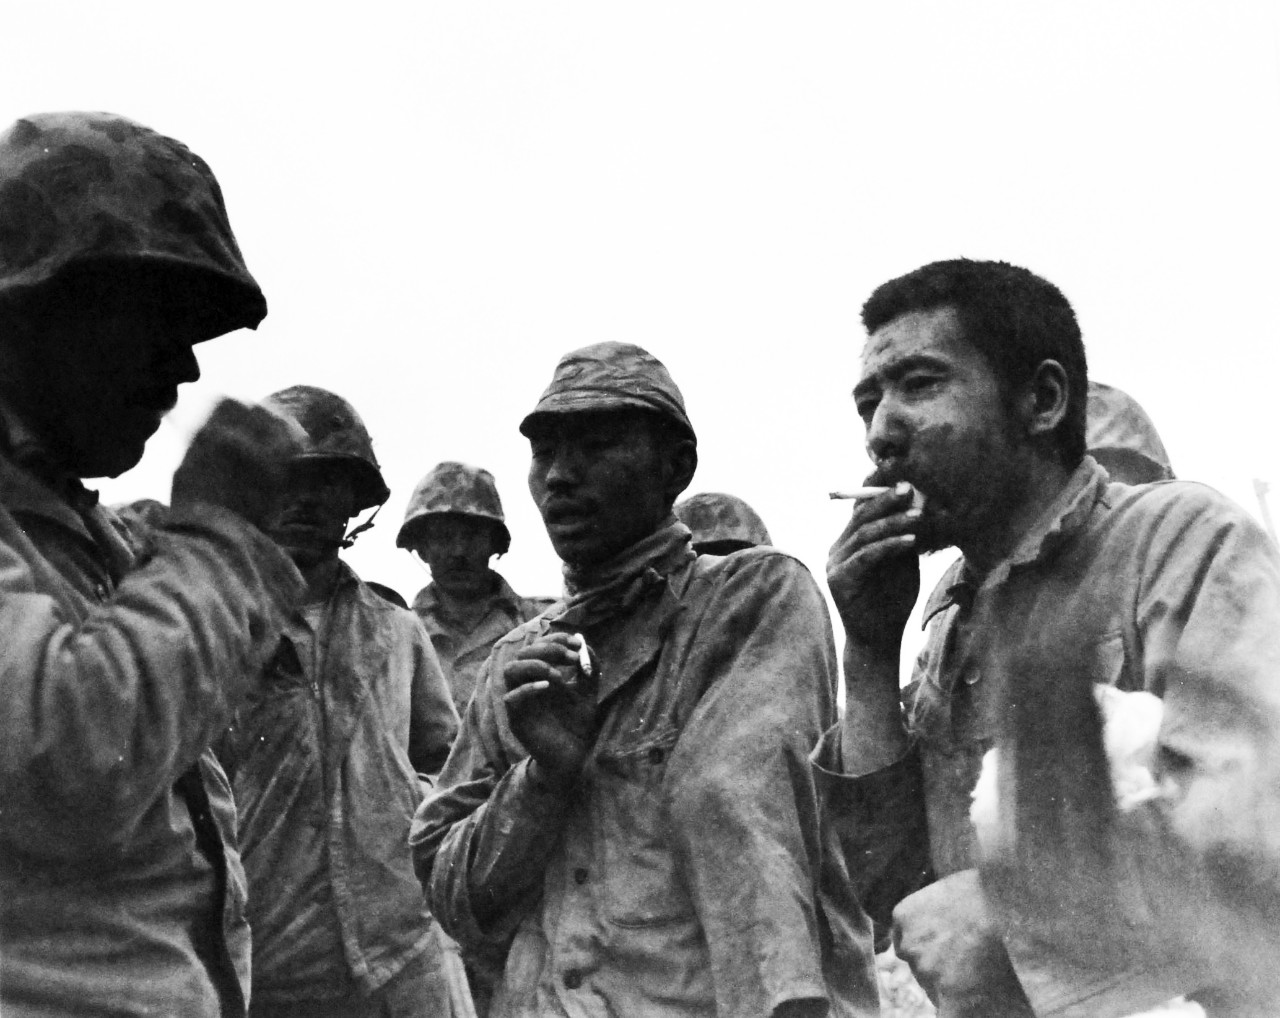 127-GW-327-115120:   Battle for Iwo Jima, February-March 1945.   Two Japanese Prisoners of War taken by K Company, Third Battalion, Twenty-First Marines.  Photographed by Sergeant Scheer, March 21, 1945.  Official U.S. Marine Corps Photograph, now in the collections of the National Archives.  (2014/6/19). 